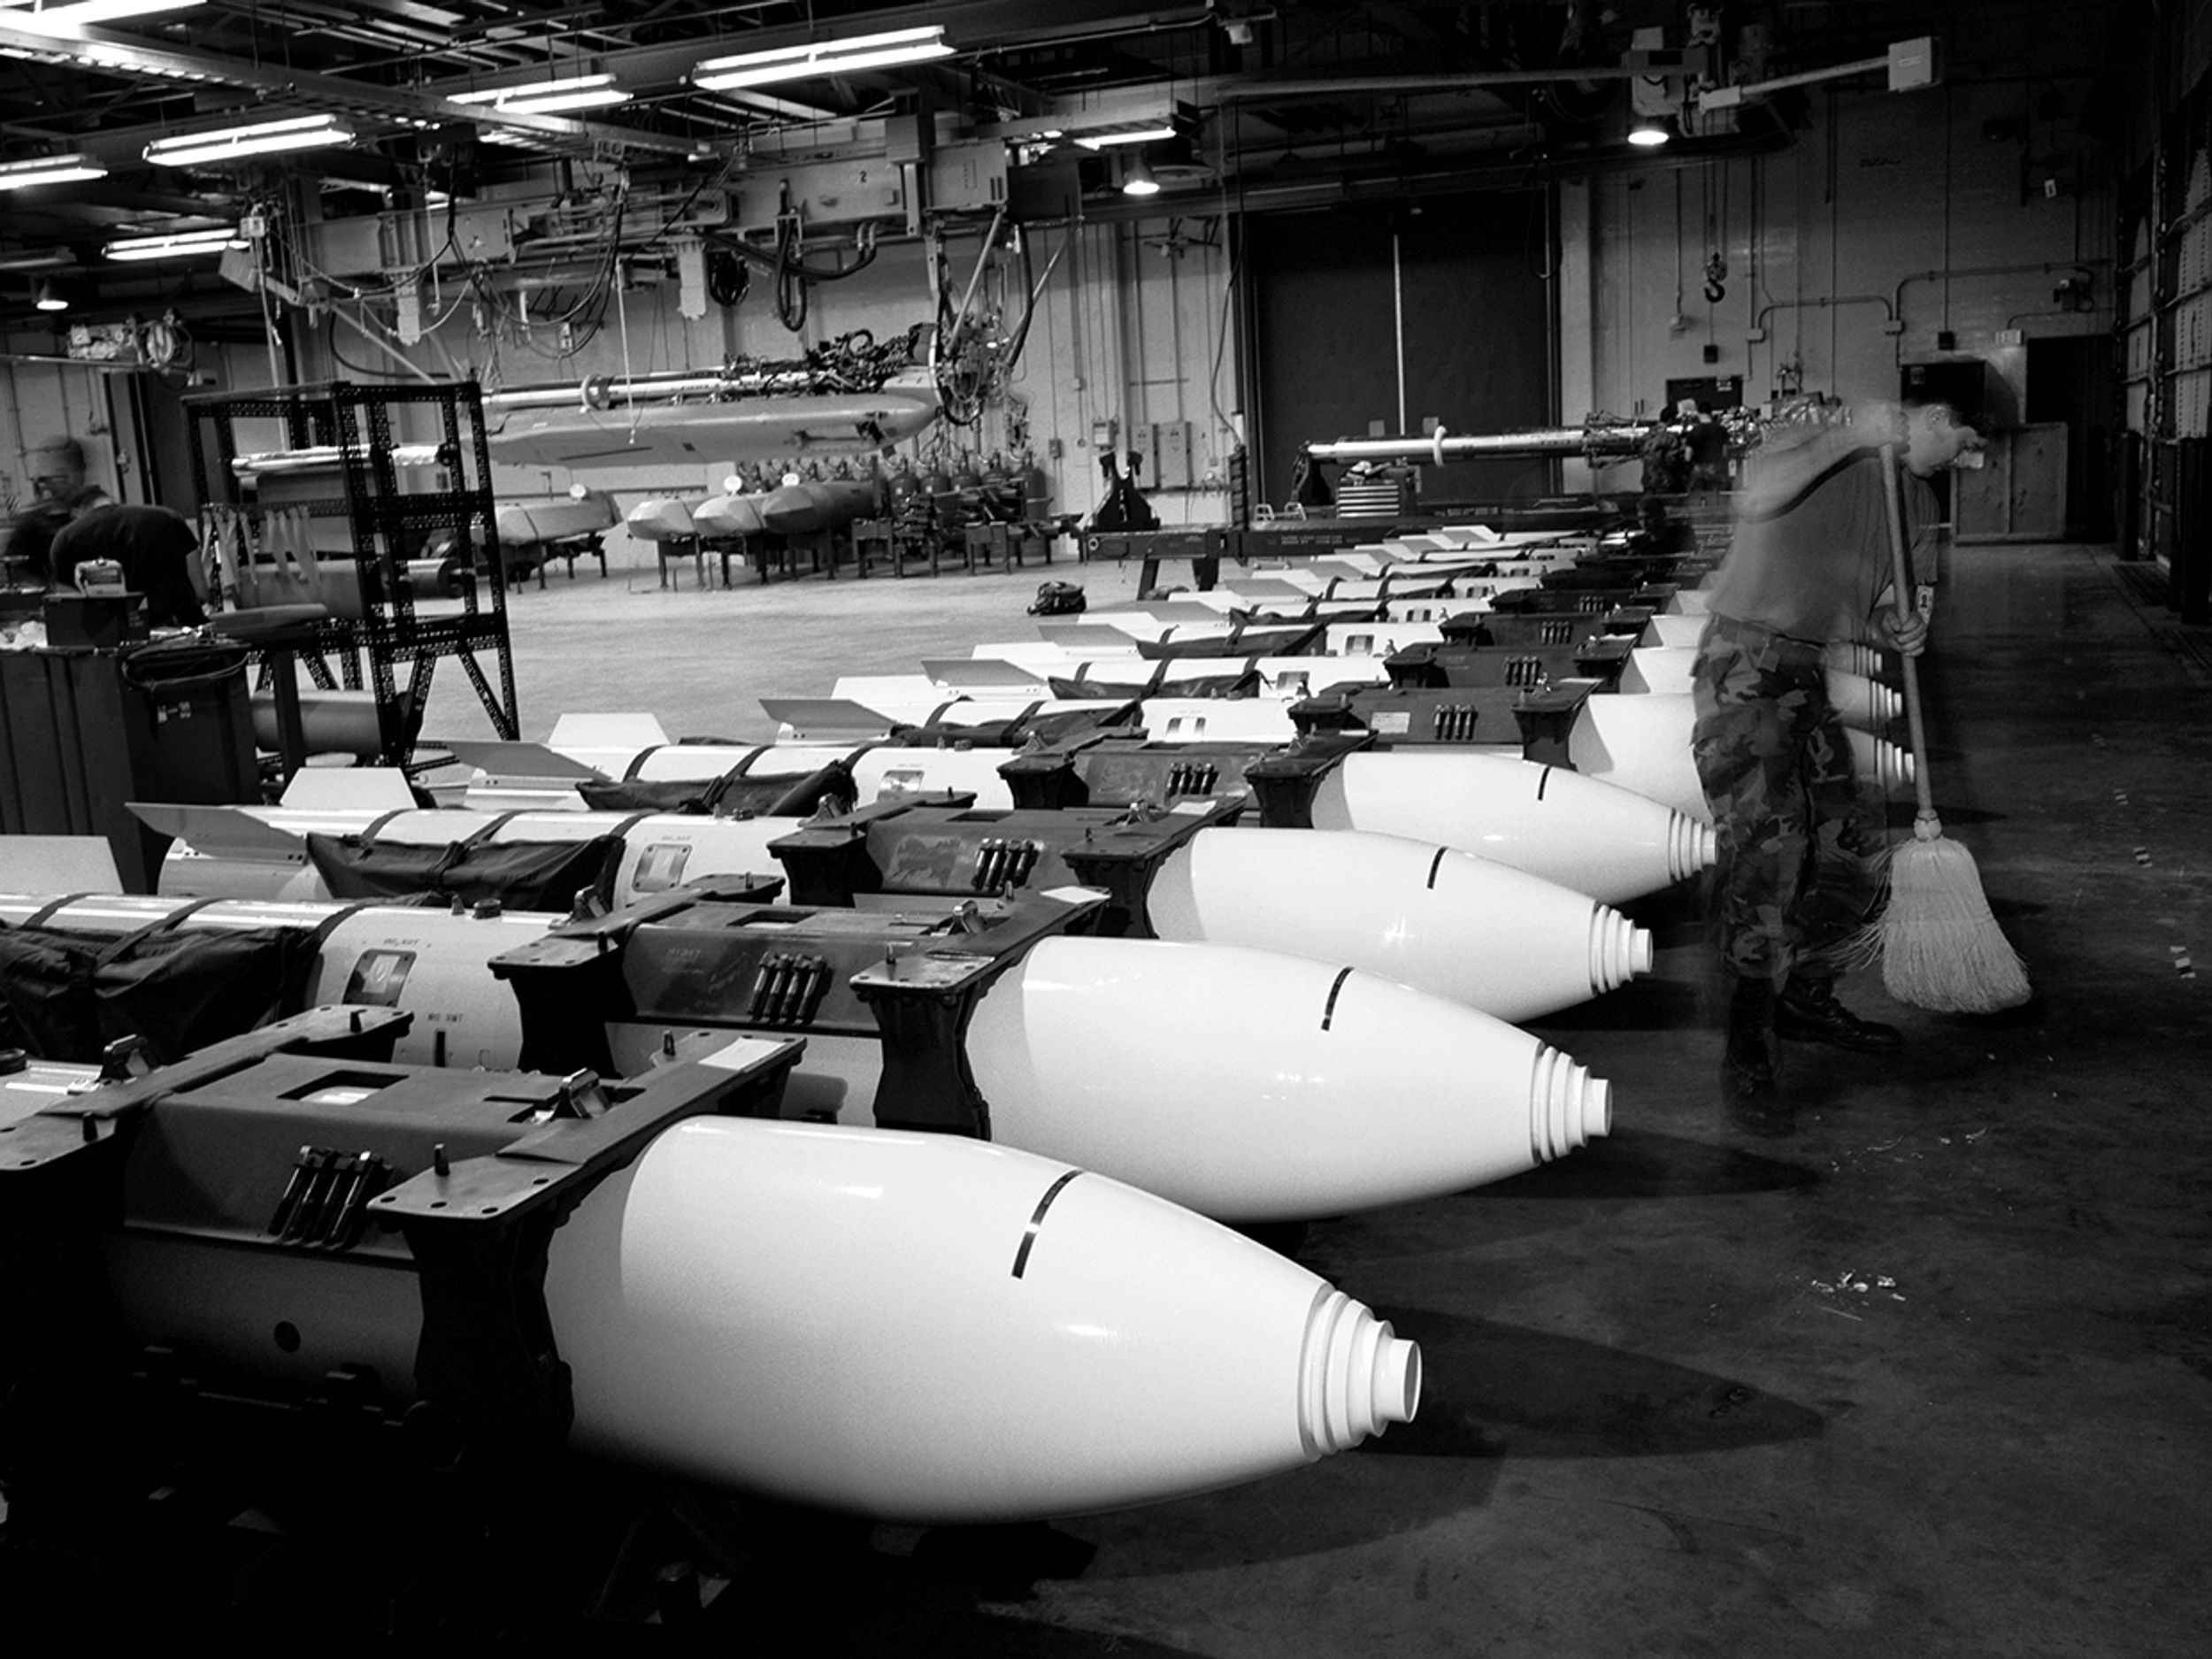 Nuclear gravity bombs at Barksdale Air Force Base, La.